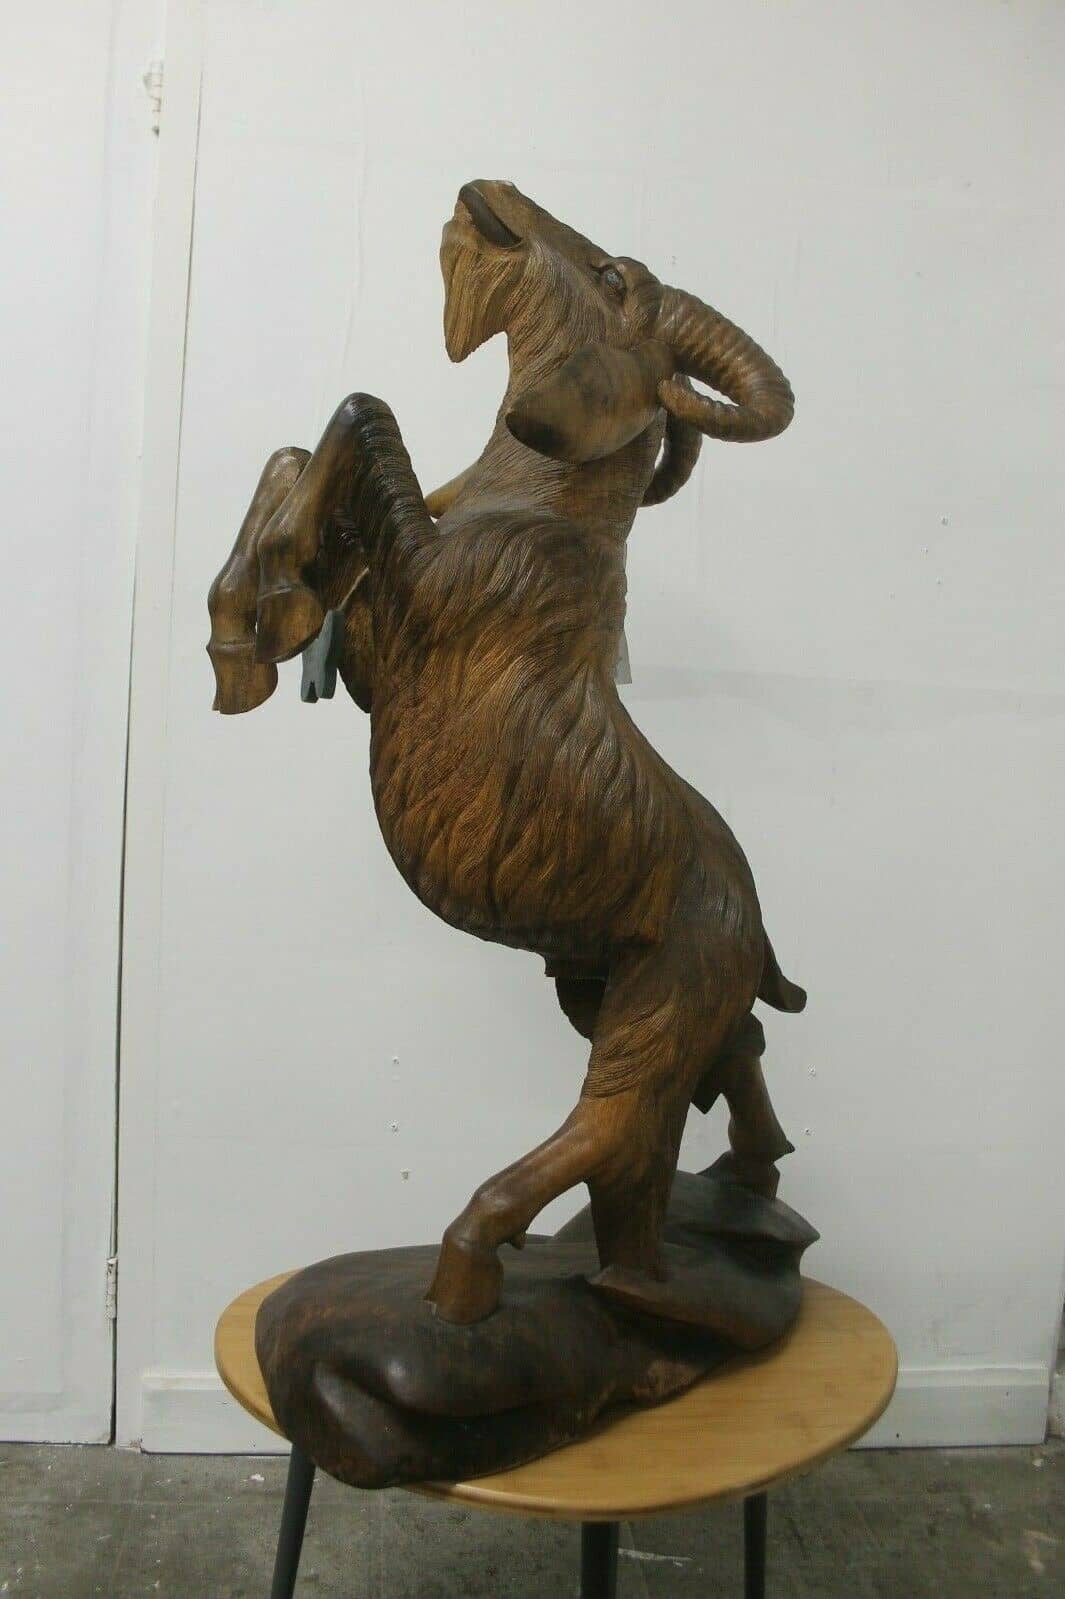 Large Vintage Hand Carved Black Forest Wood Carving of a Goat 37″ by 24″ by 11″.